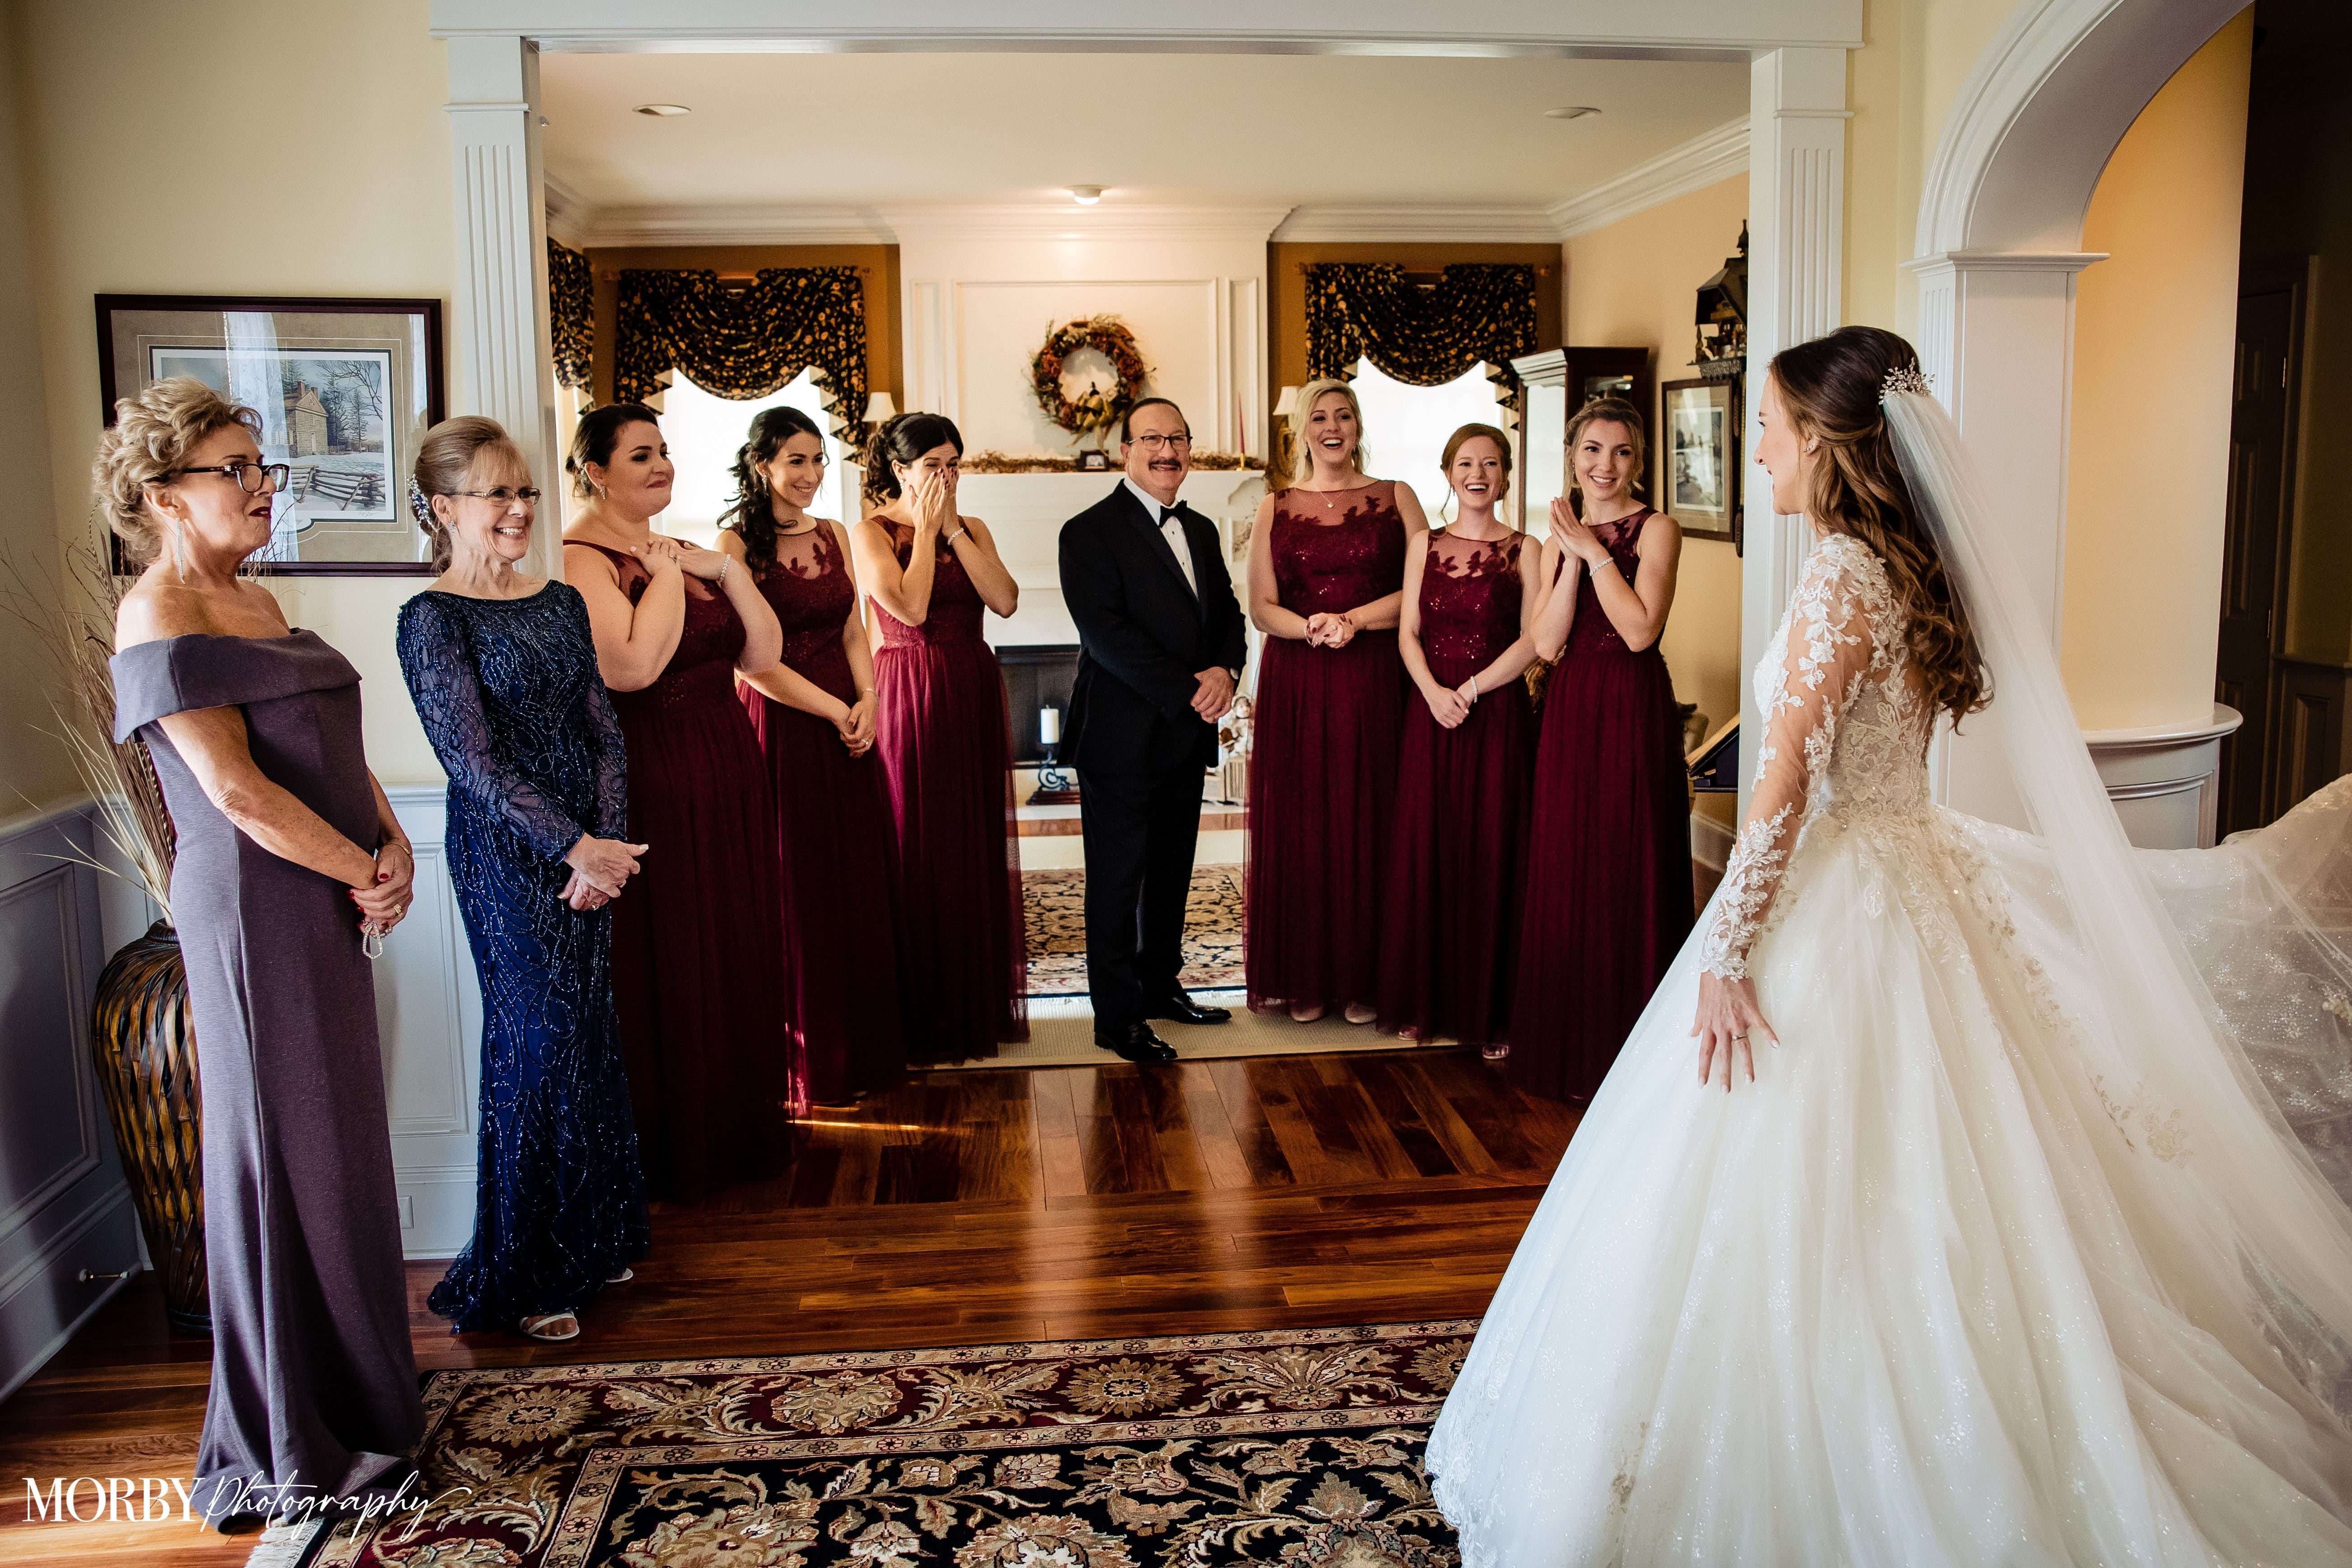 Bride Showing her Dress To Bridesmaids